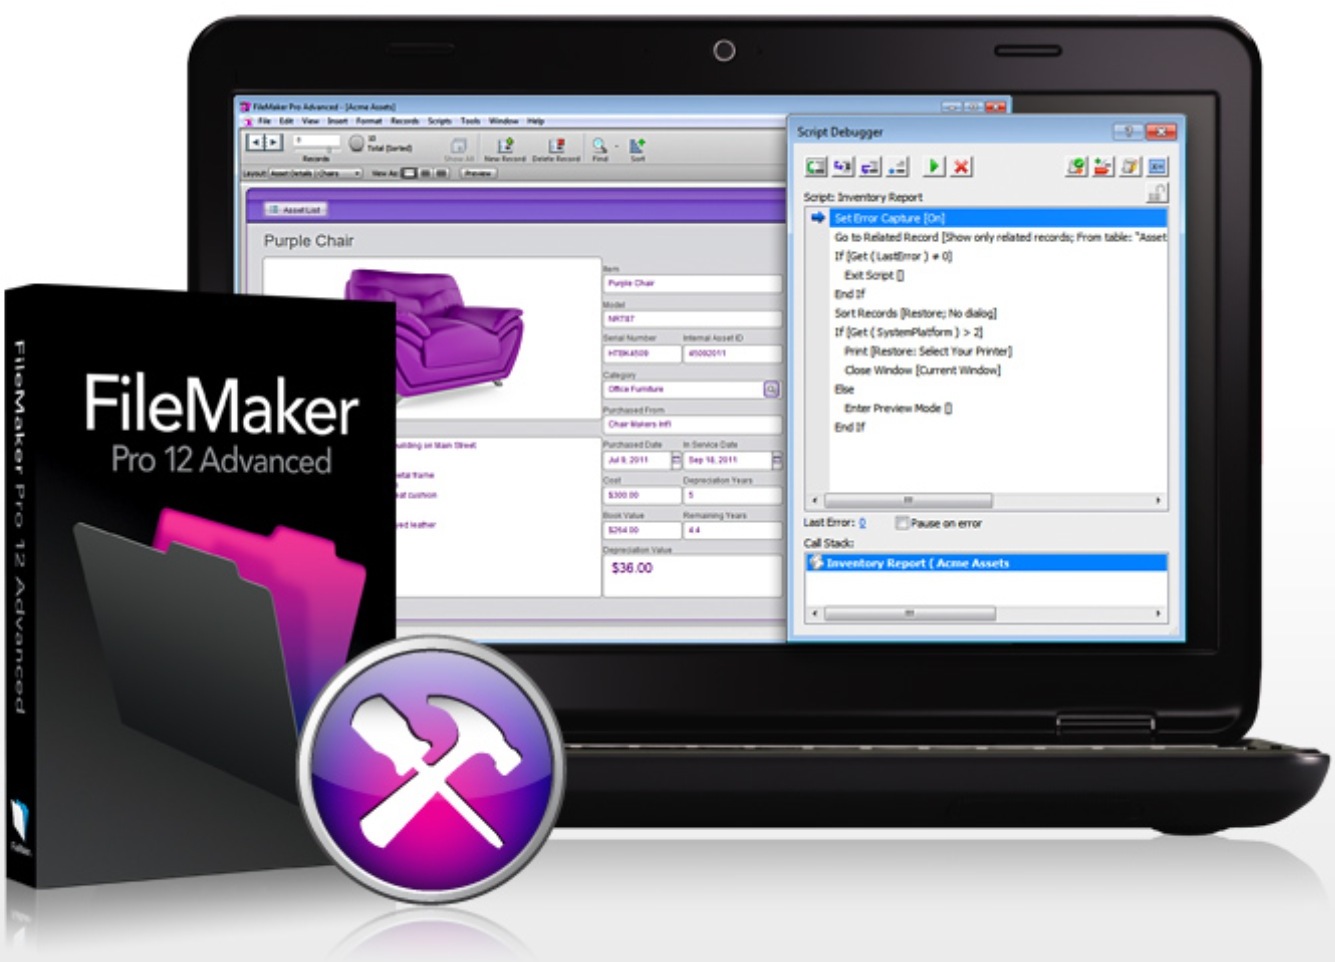 Where to buy FileMaker Pro 12 Advanced